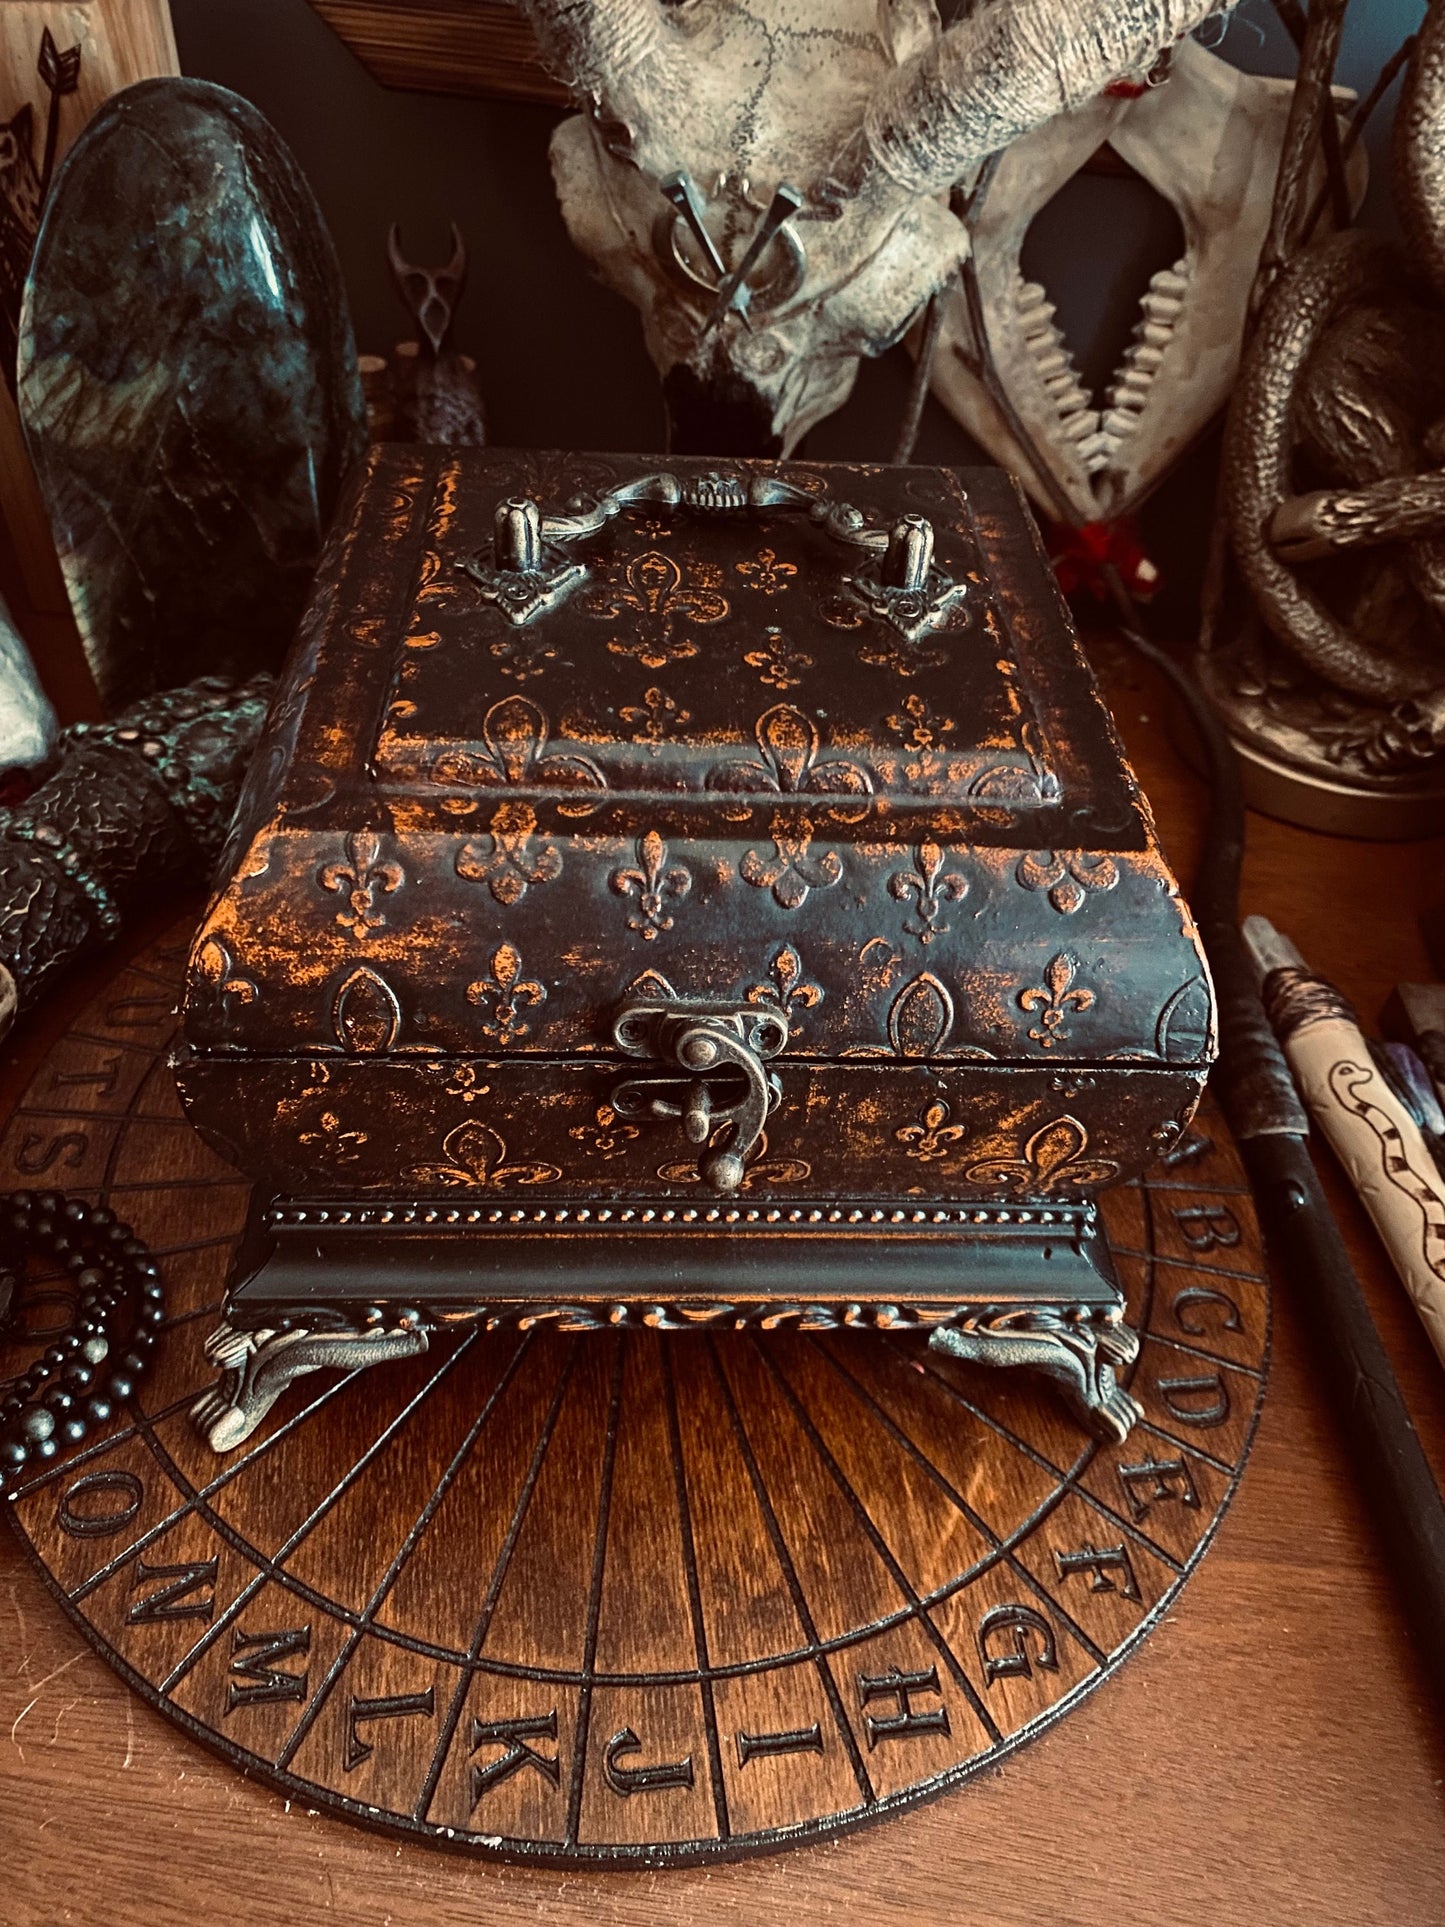 Scrying Mirror Divination Box